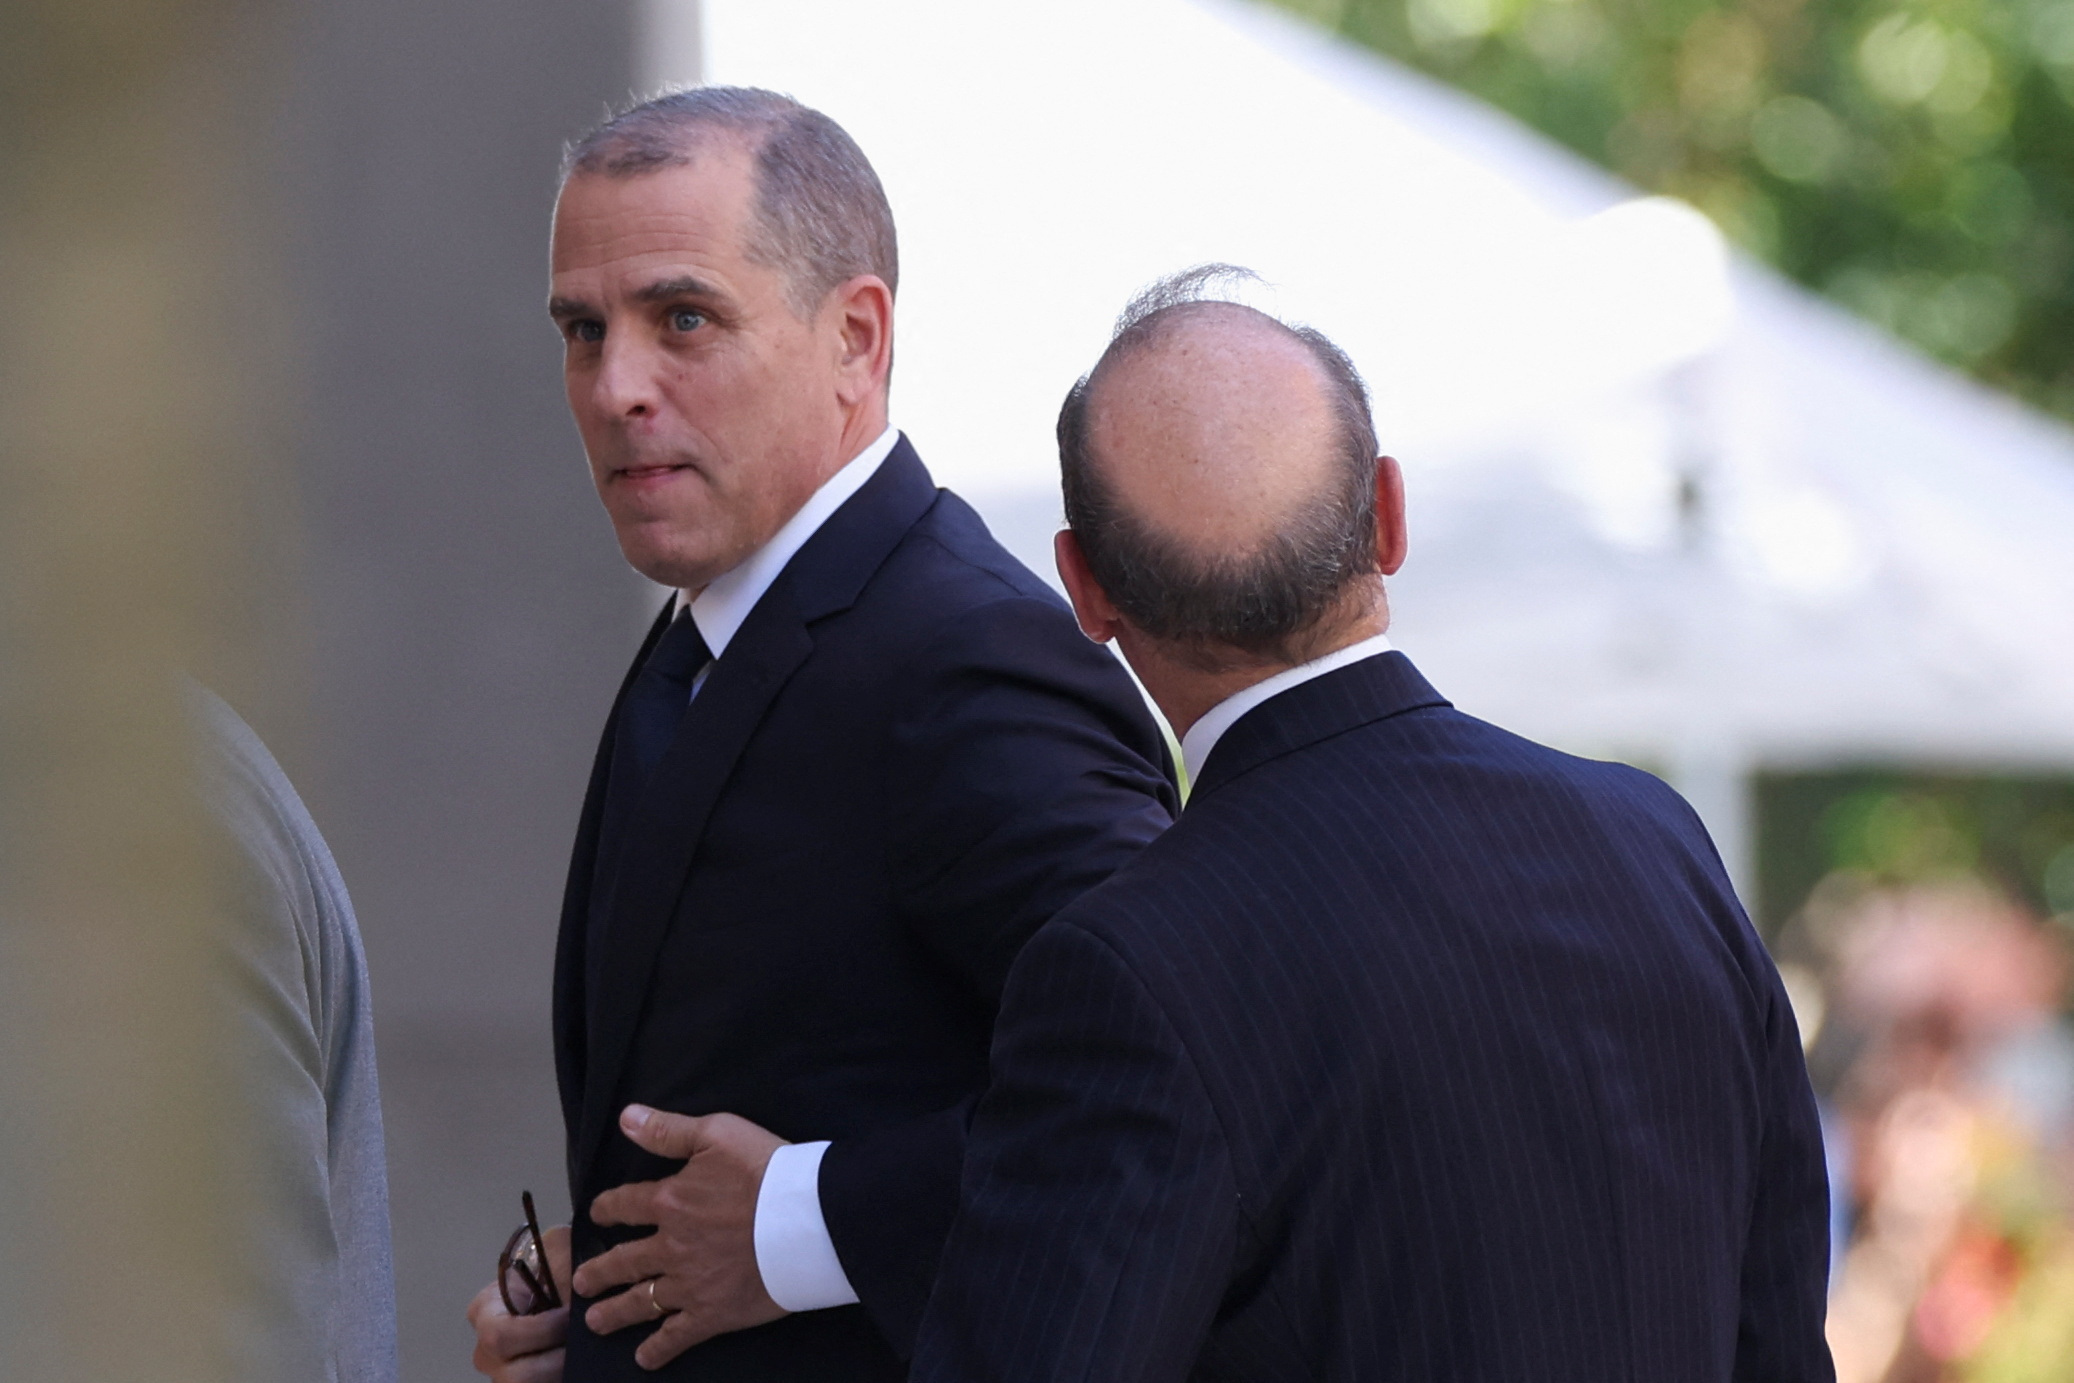 Hunter Biden to face gun charges in Wilmington court